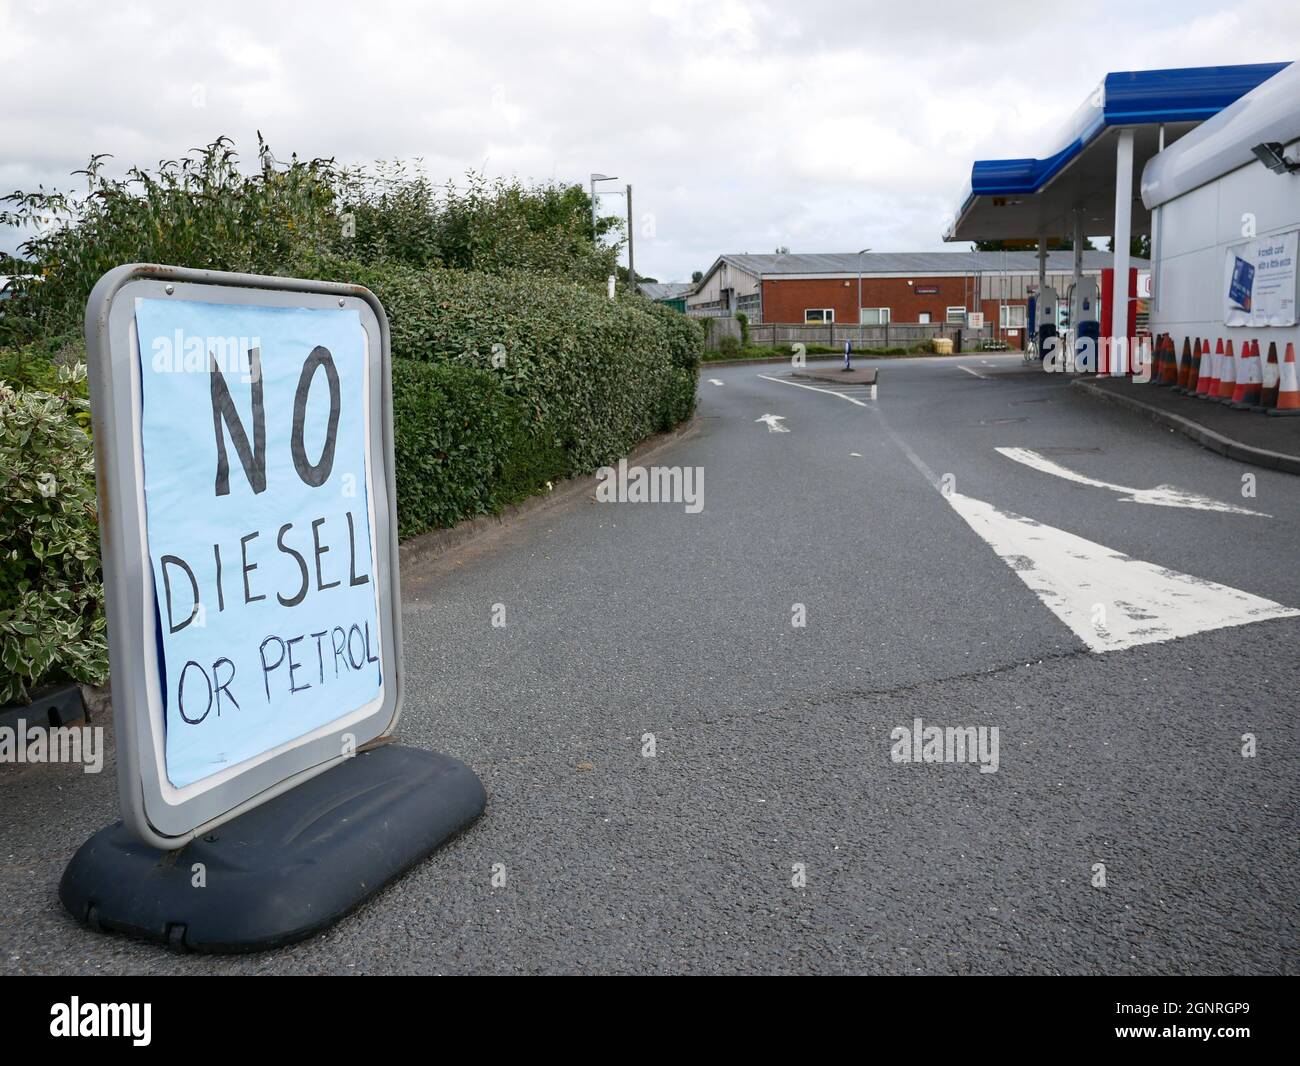 Fuel crisis UK. Panic buying and shortage of HGV drivers for deliveries causes petrol stations to run out of diesel and petrol fuels. Stock Photo